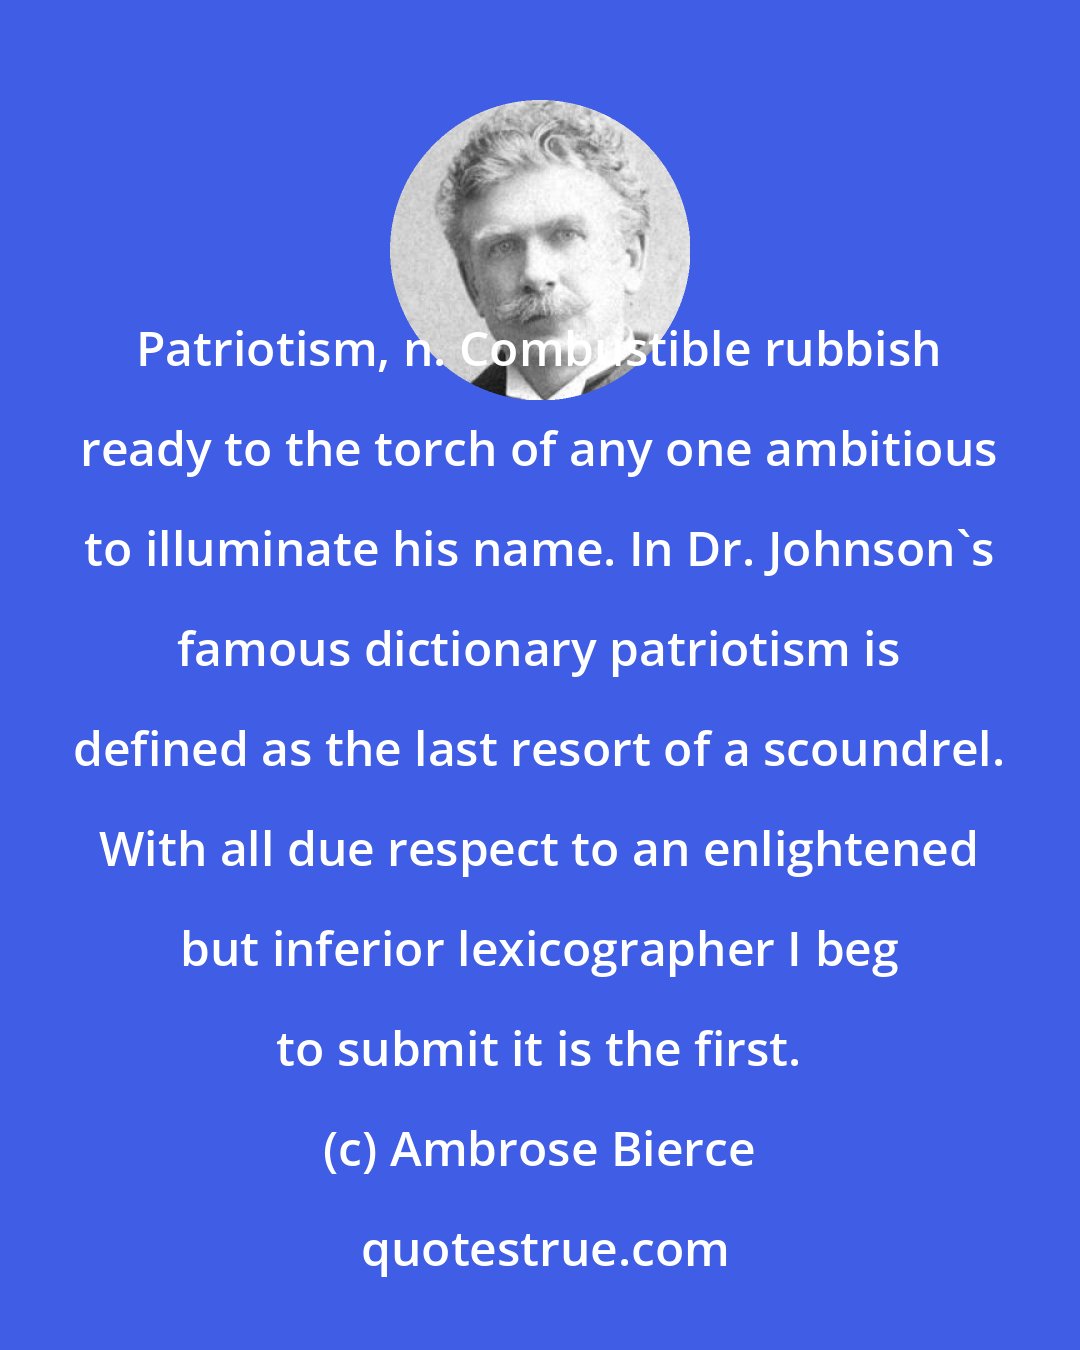 Ambrose Bierce: Patriotism, n. Combustible rubbish ready to the torch of any one ambitious to illuminate his name. In Dr. Johnson's famous dictionary patriotism is defined as the last resort of a scoundrel. With all due respect to an enlightened but inferior lexicographer I beg to submit it is the first.